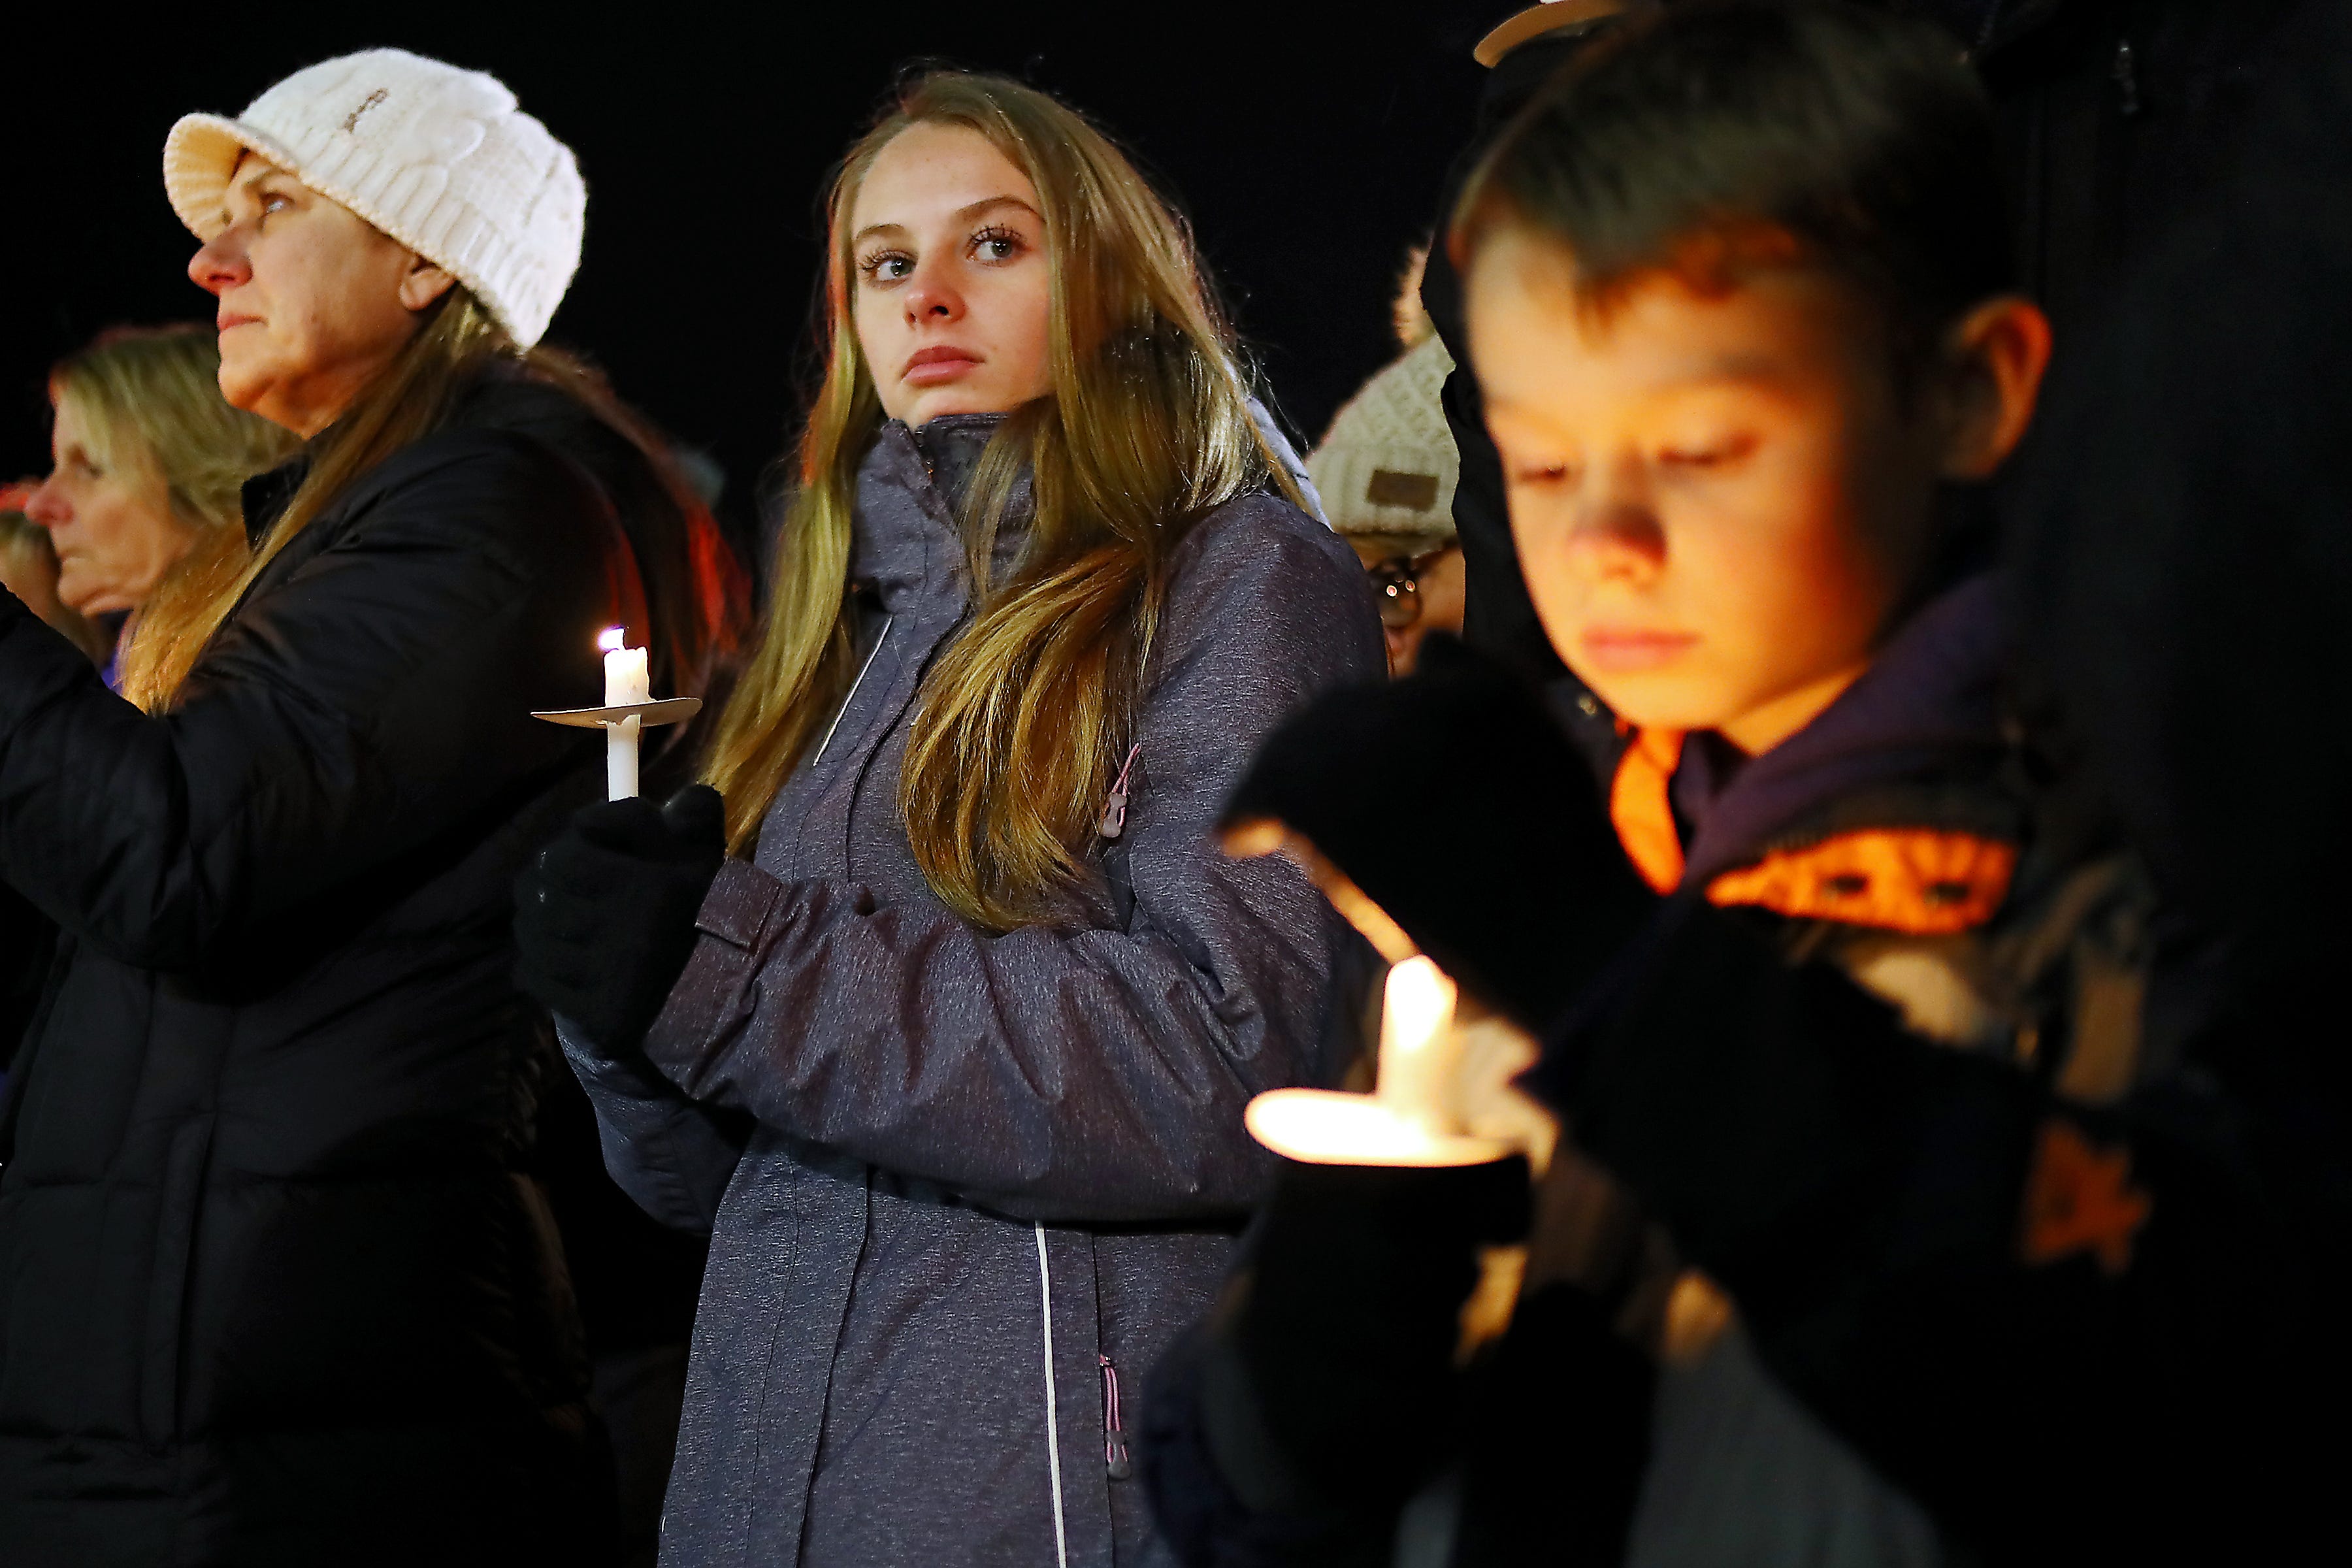 Students take part in a moment of silence during a candlelight vigil on Friday, Dec. 3, 2021 in downtown Oxford in memory of the four Oxford High School students who died in a school shooting earlier this week.